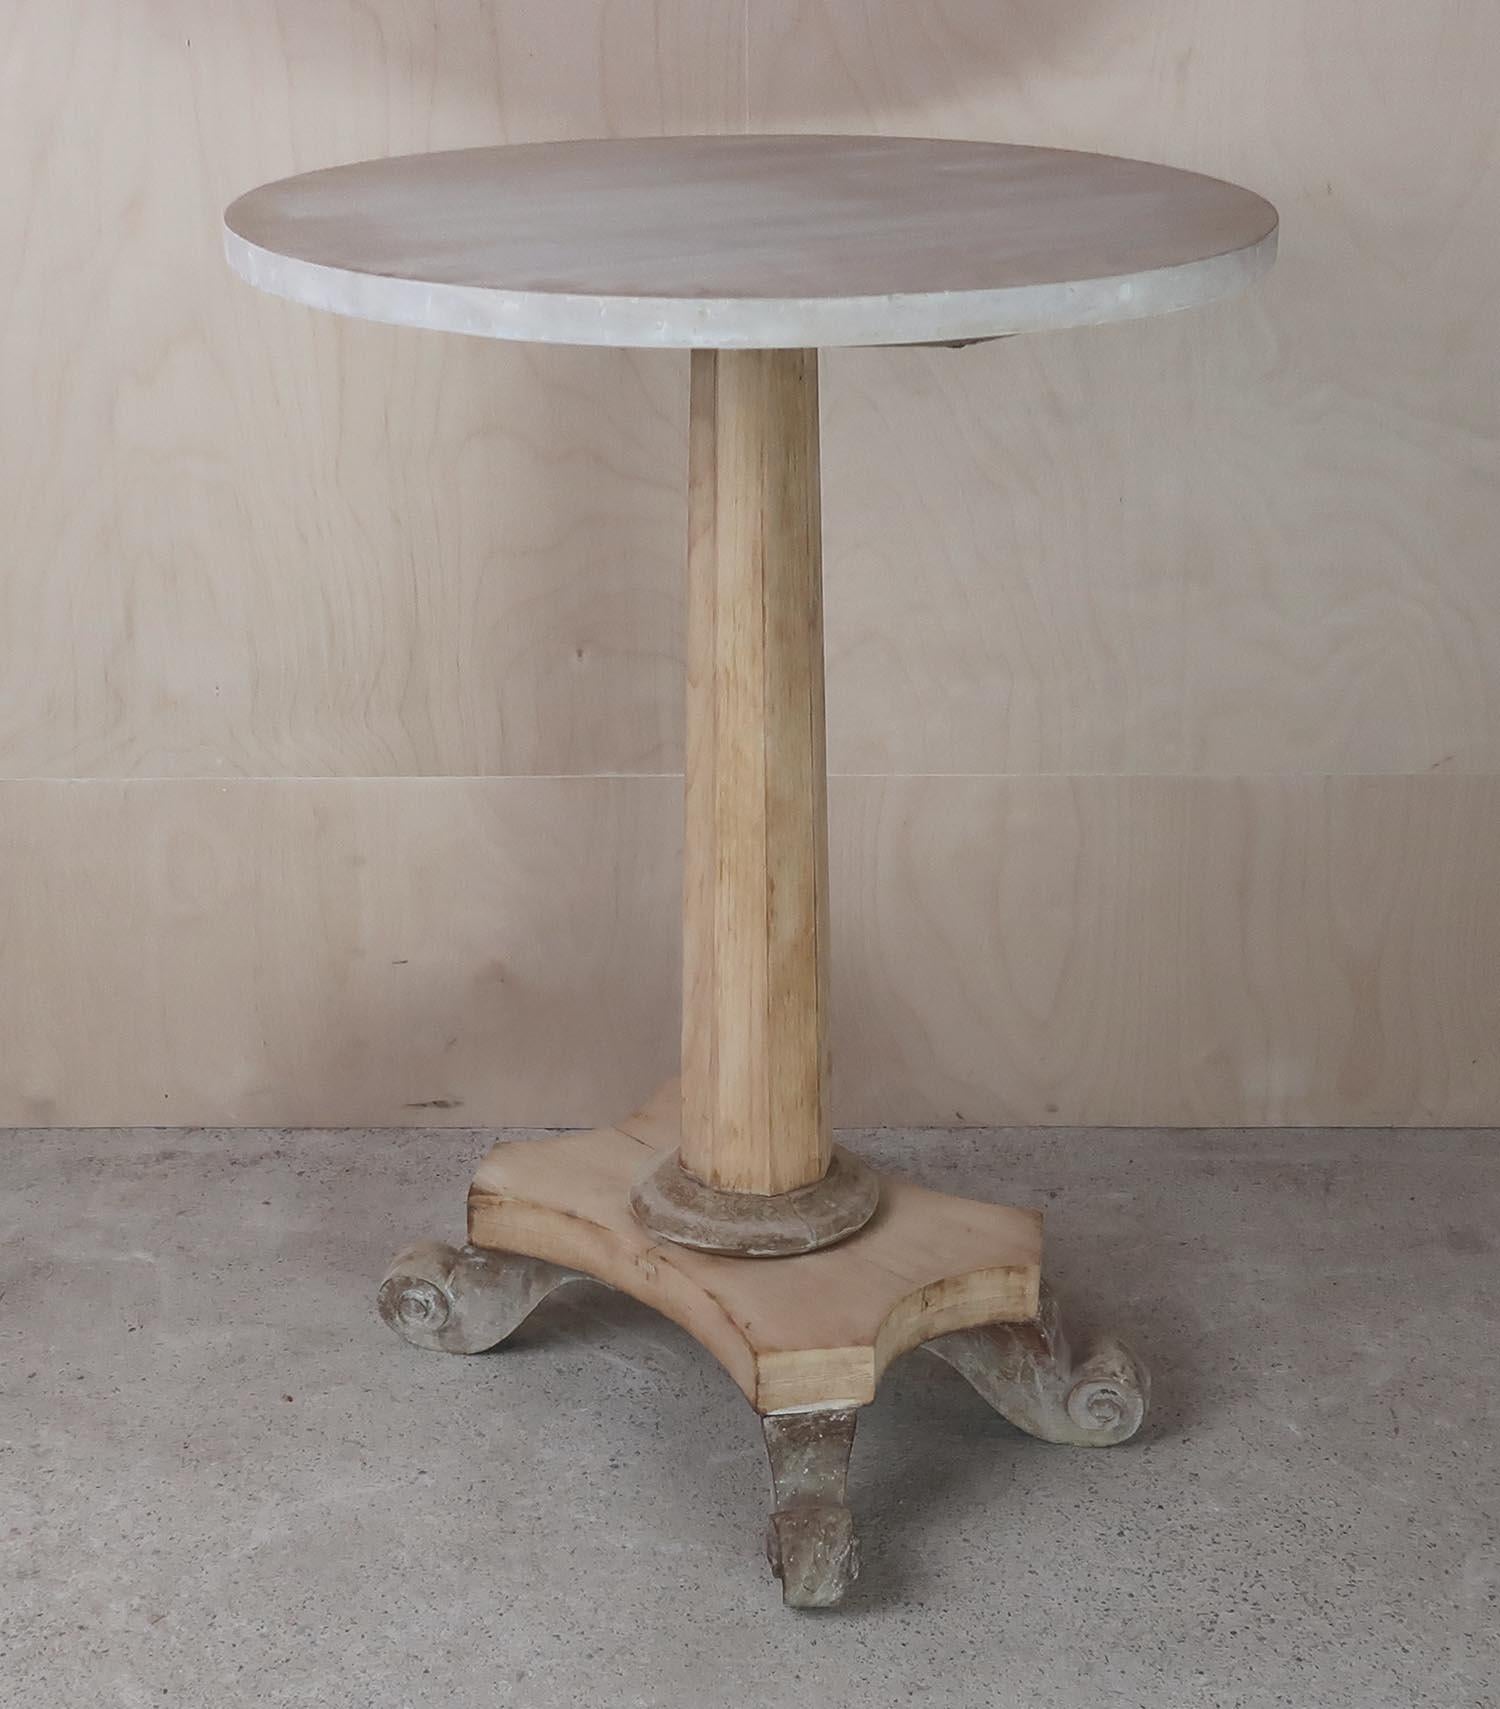 Elegant small round table. Made from bleached tropical hardwood and pine

I particularly like its simplicity and the scroll feet.

The top is old but it is a replacement

I have chosen not to lacquer or wax the table.

Sturdy